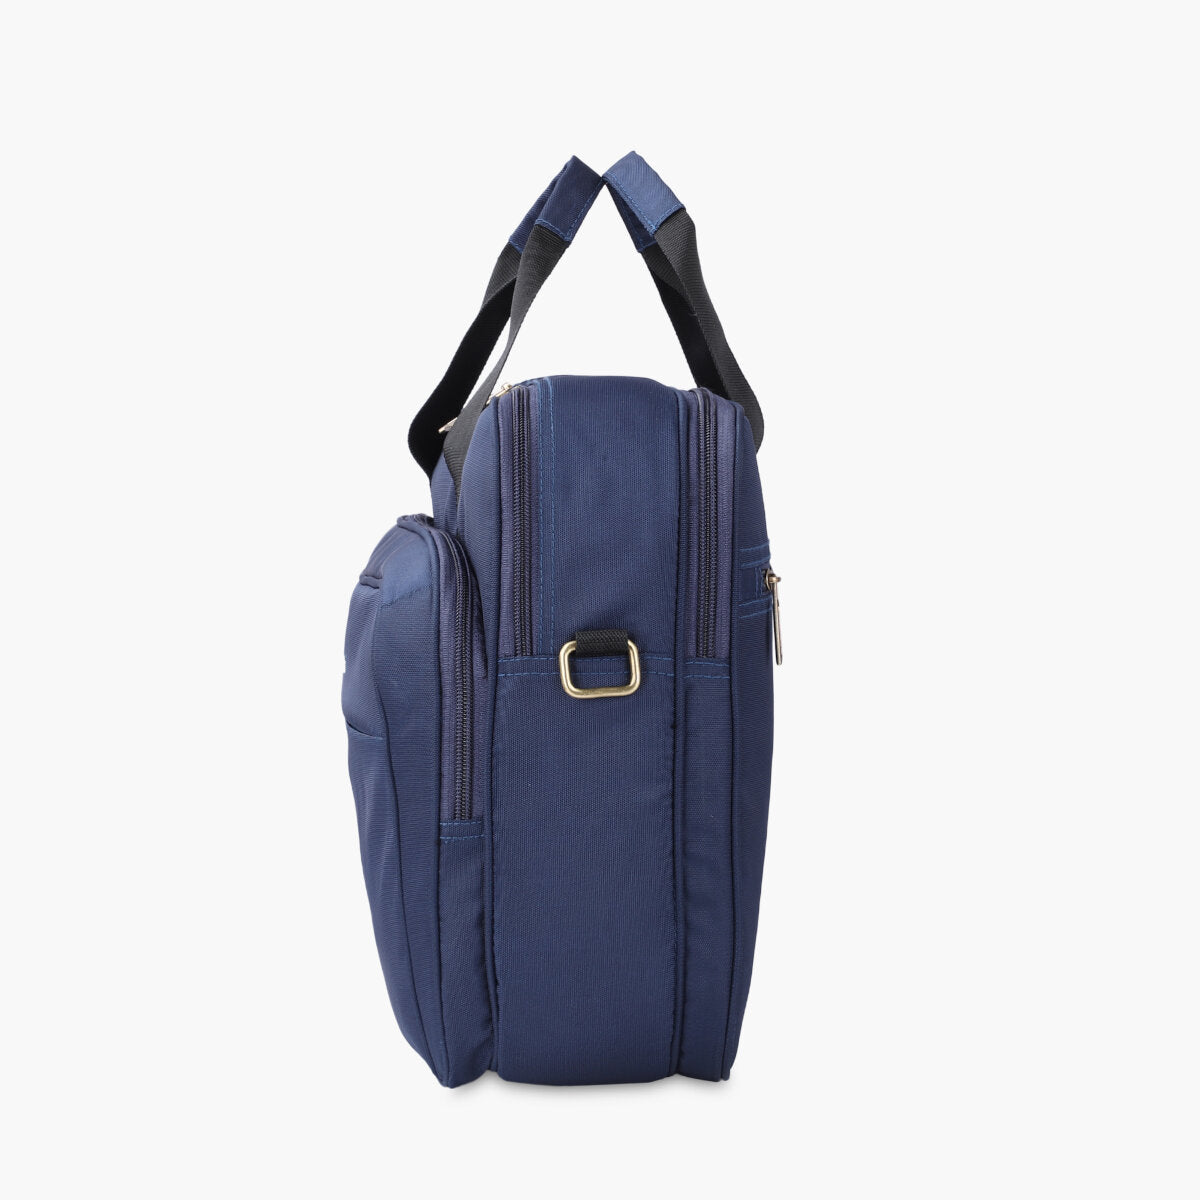 Navy-Blue, Protecta Staunch Ally Travel & Offfice Laptop Bag-3